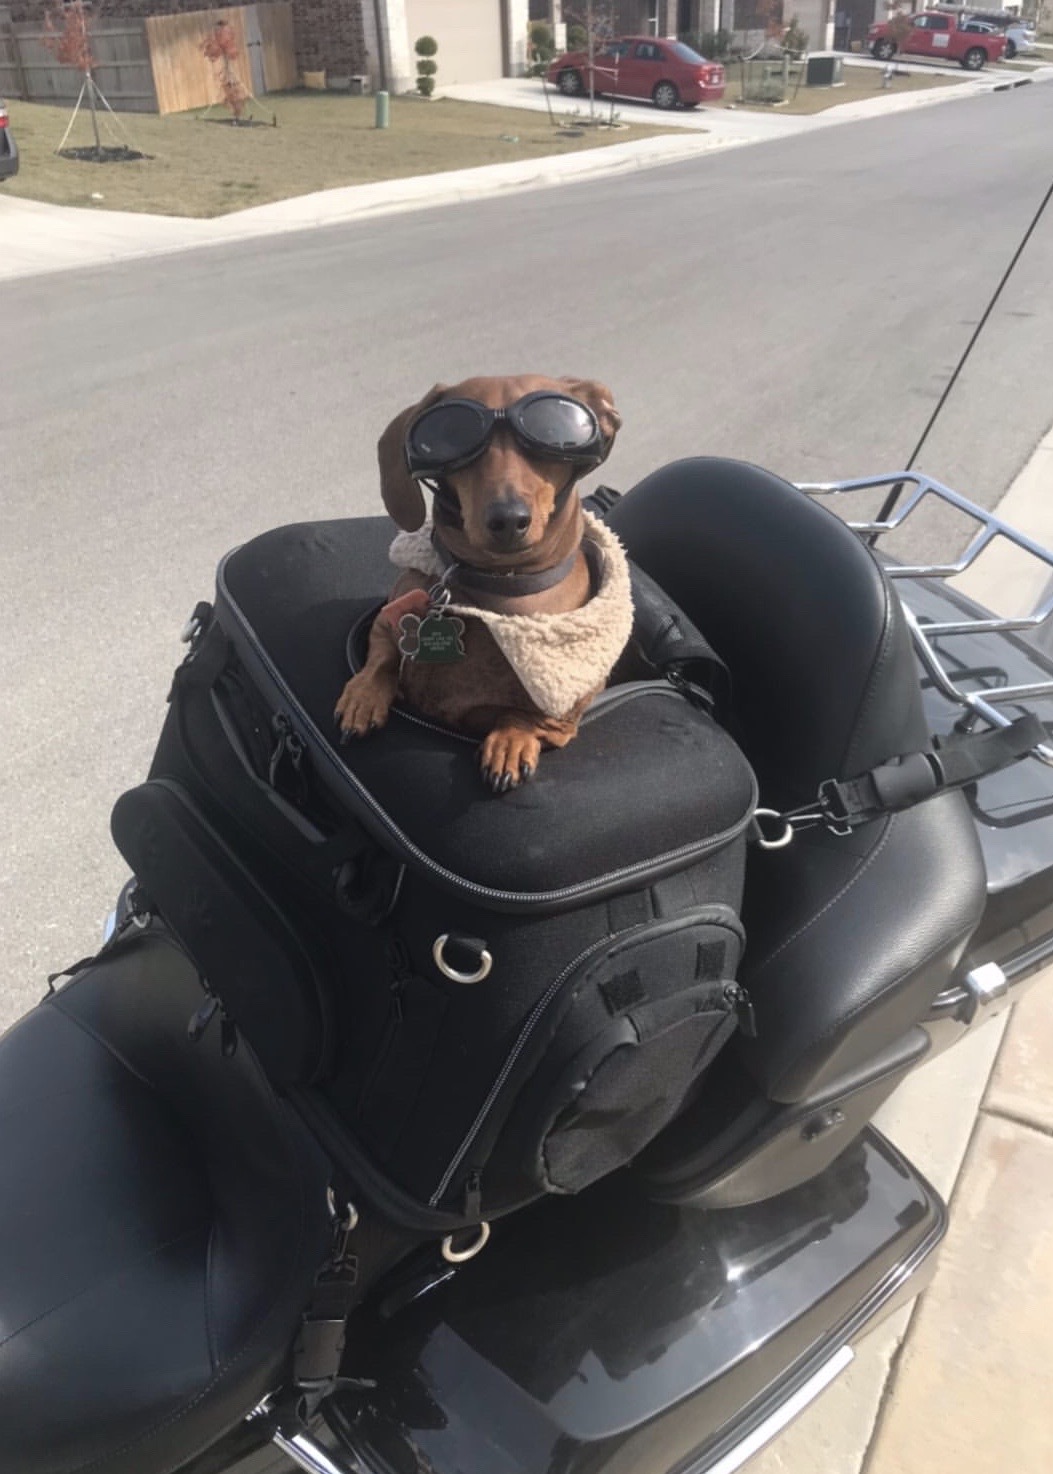 A dachshund dog wearing goggles and a biker vest poses for a photo on the back of a Harley Davidson motorcycle, ready for a ride on River Road in New Braunfels!